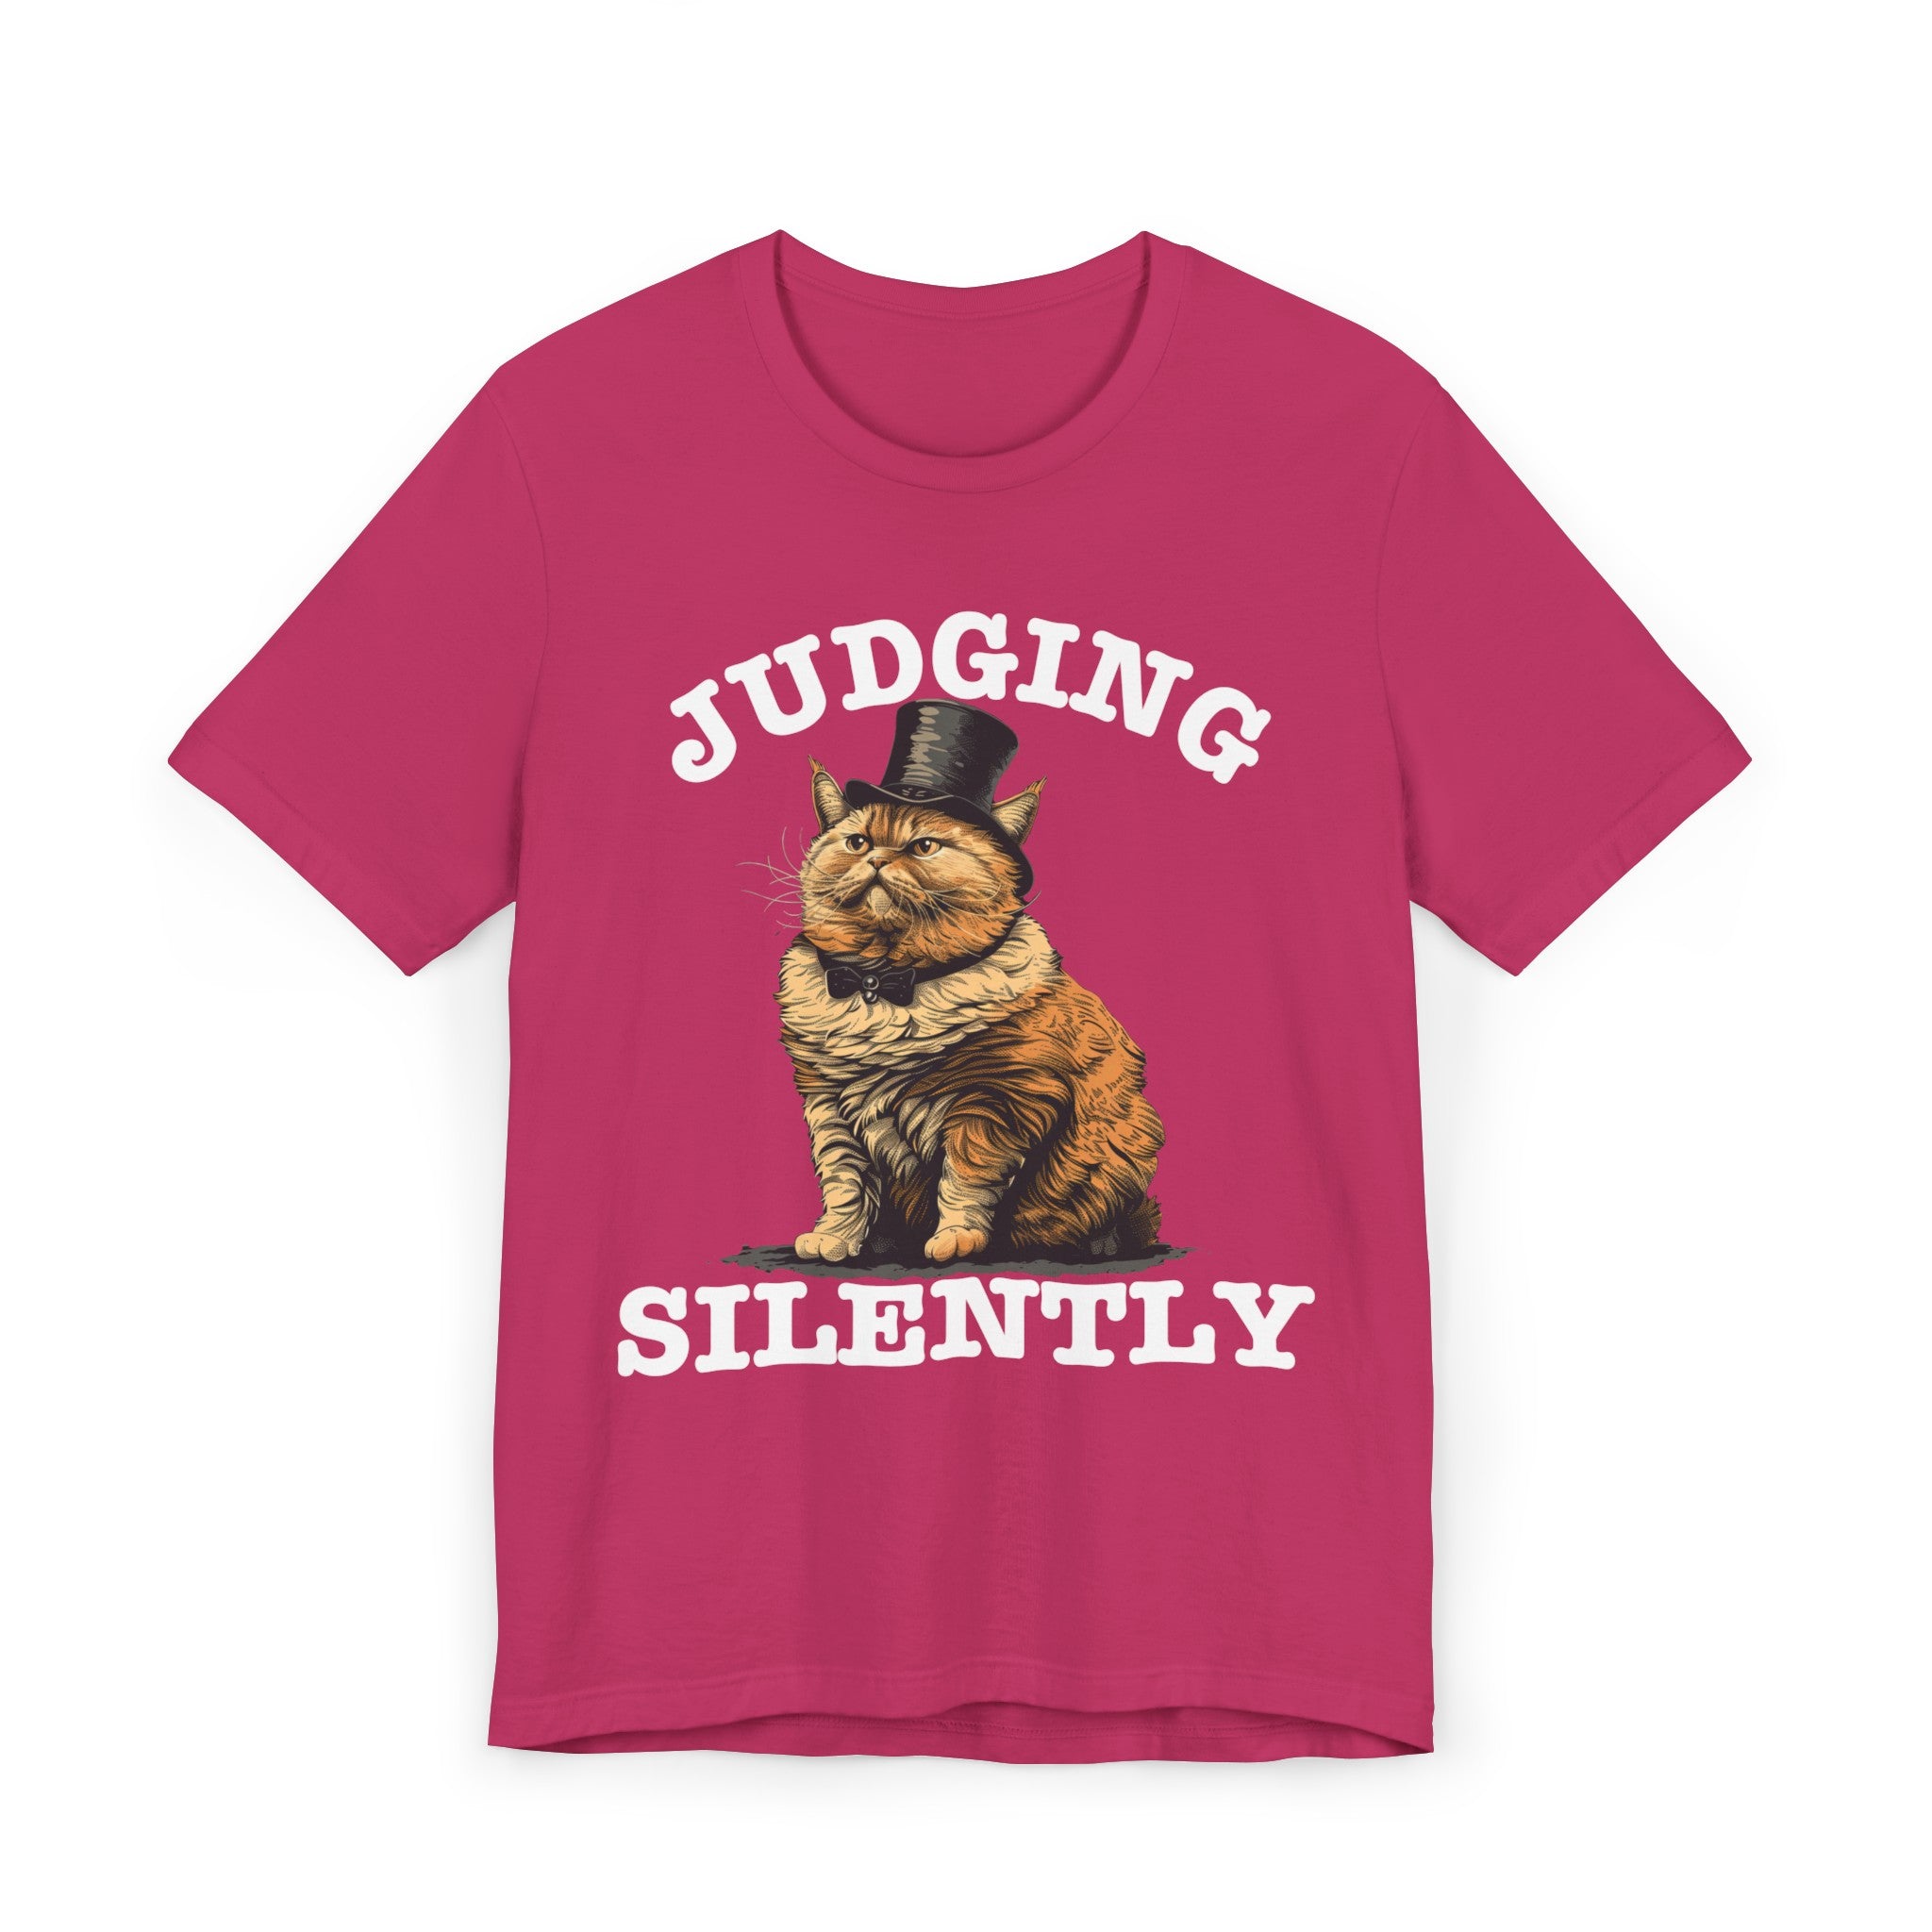 Judging Silently Cat T-Shirt, Whimsical Top Hat Cat Graphic Tee, Humorous Cat Lover Shirt, Unique Gift for Cat Enthusiasts